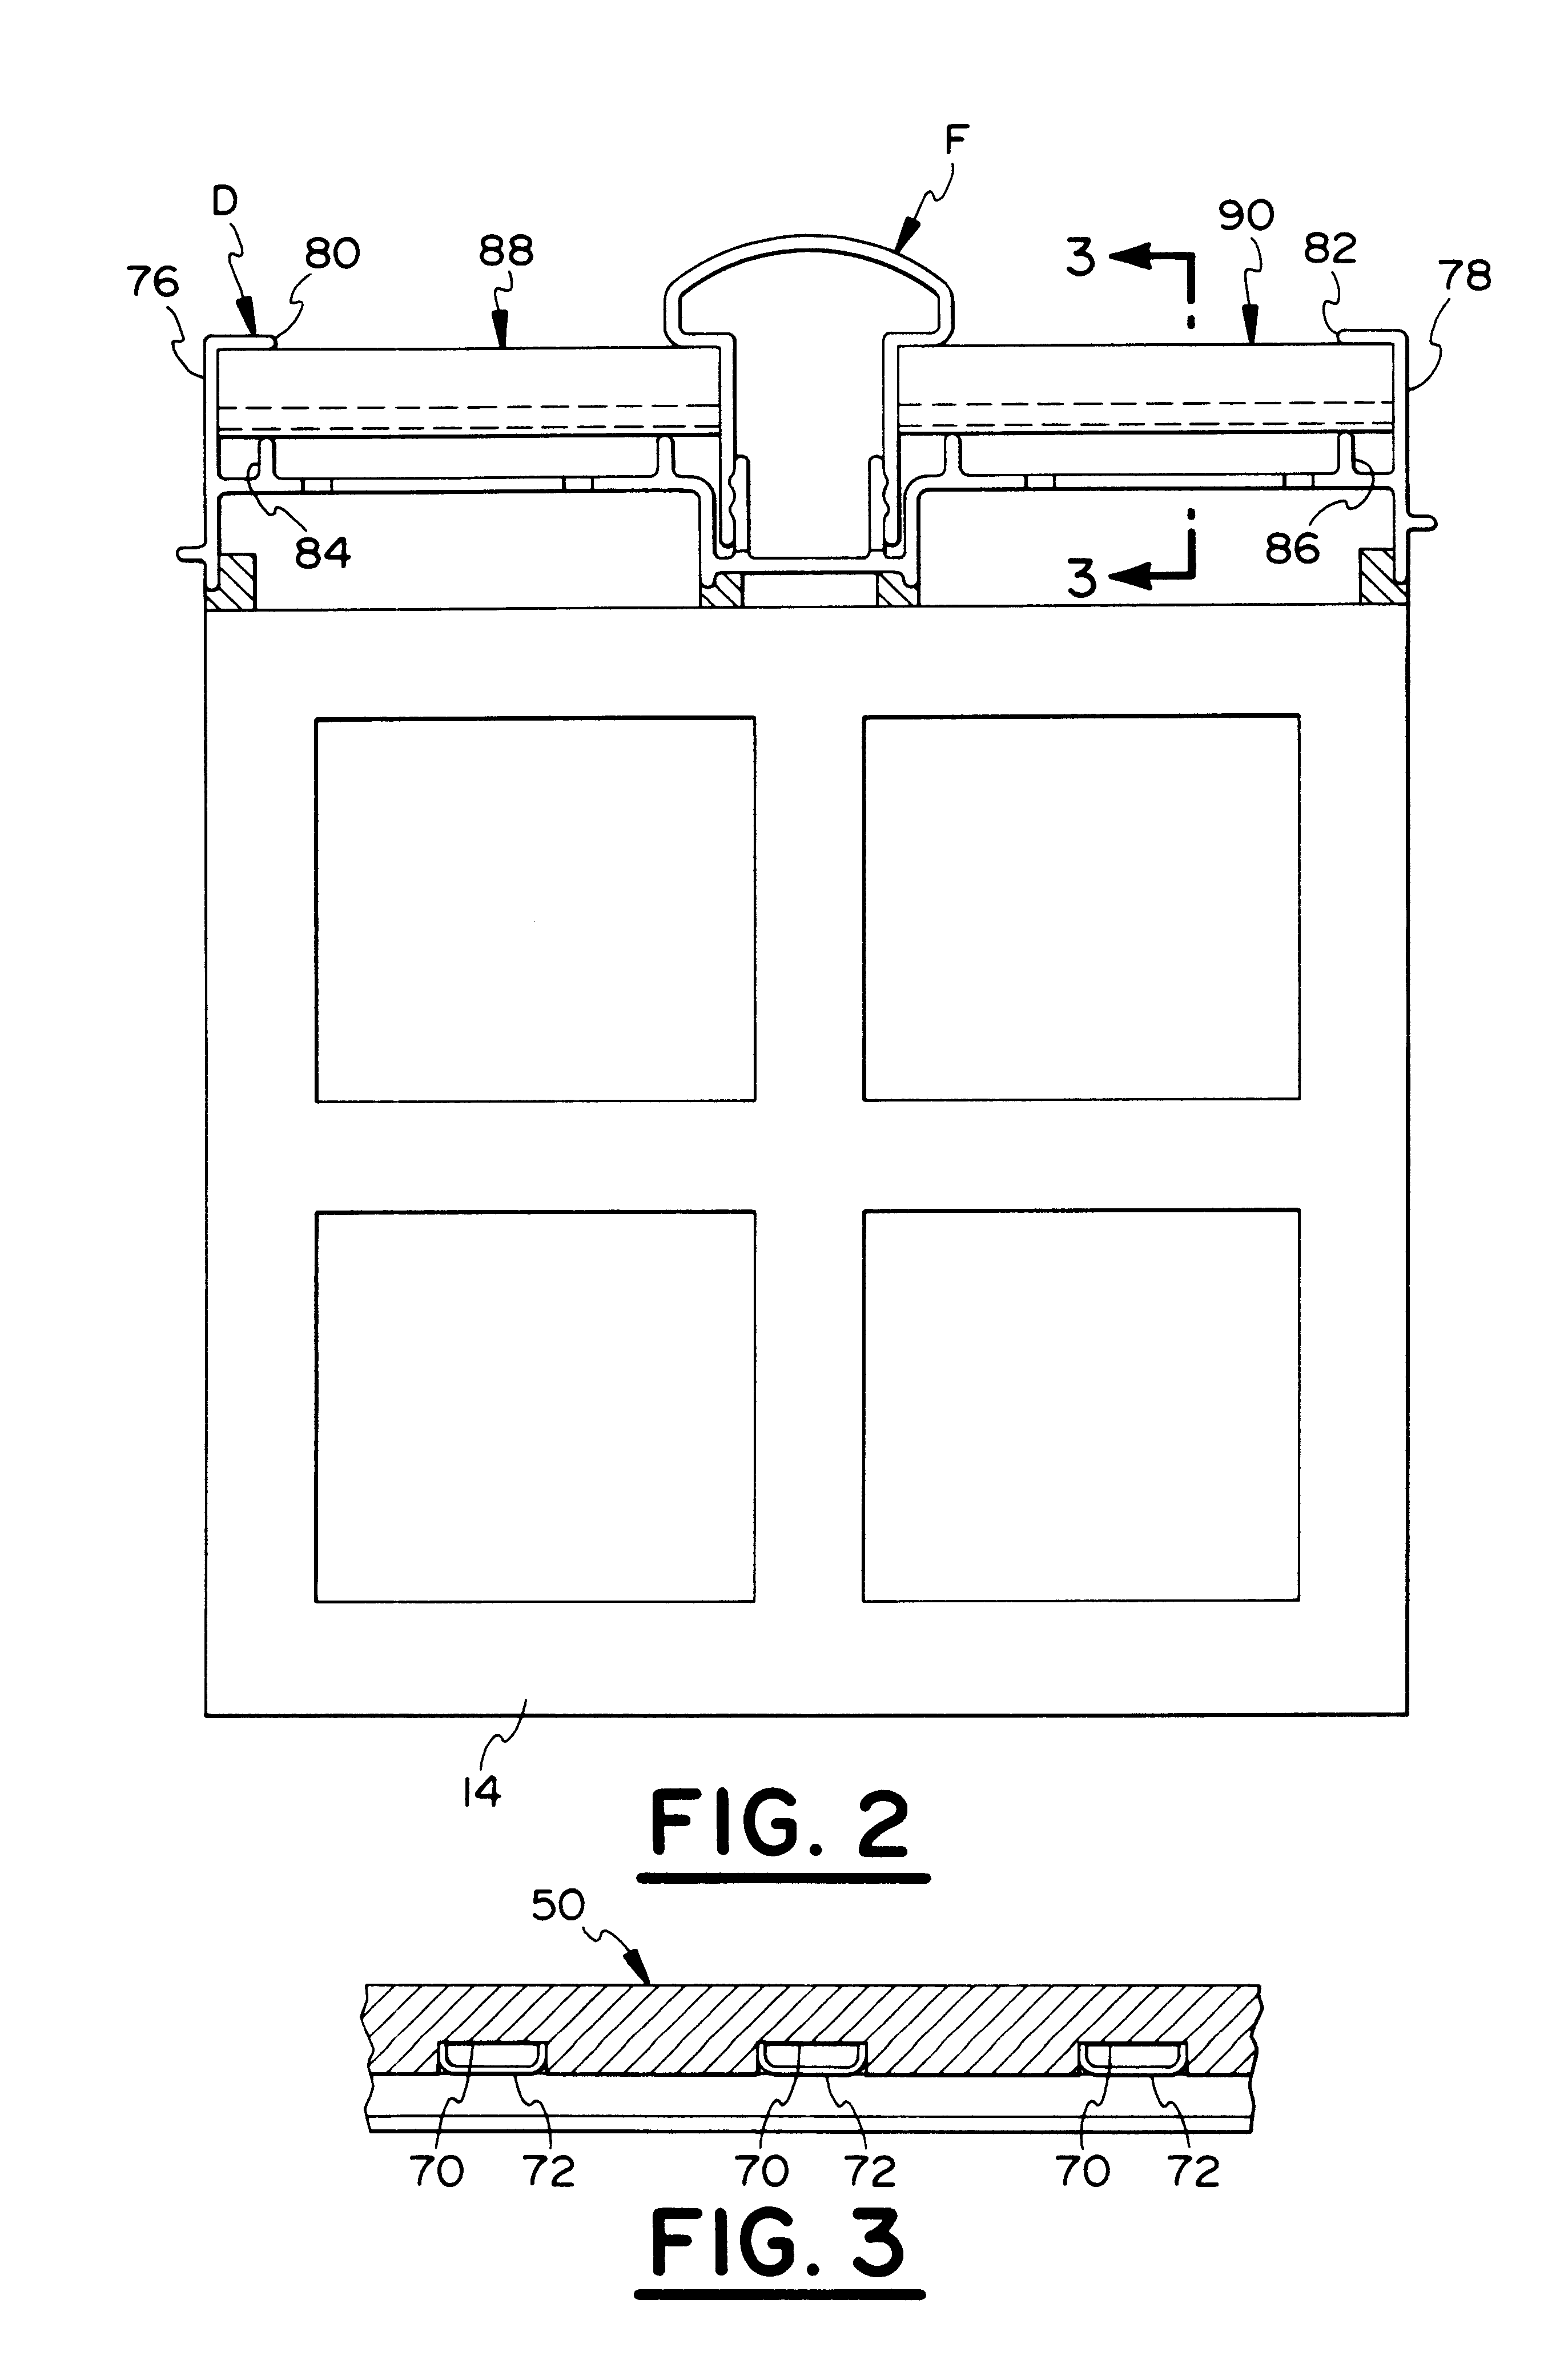 Apparatus for directing fluids through a filter system